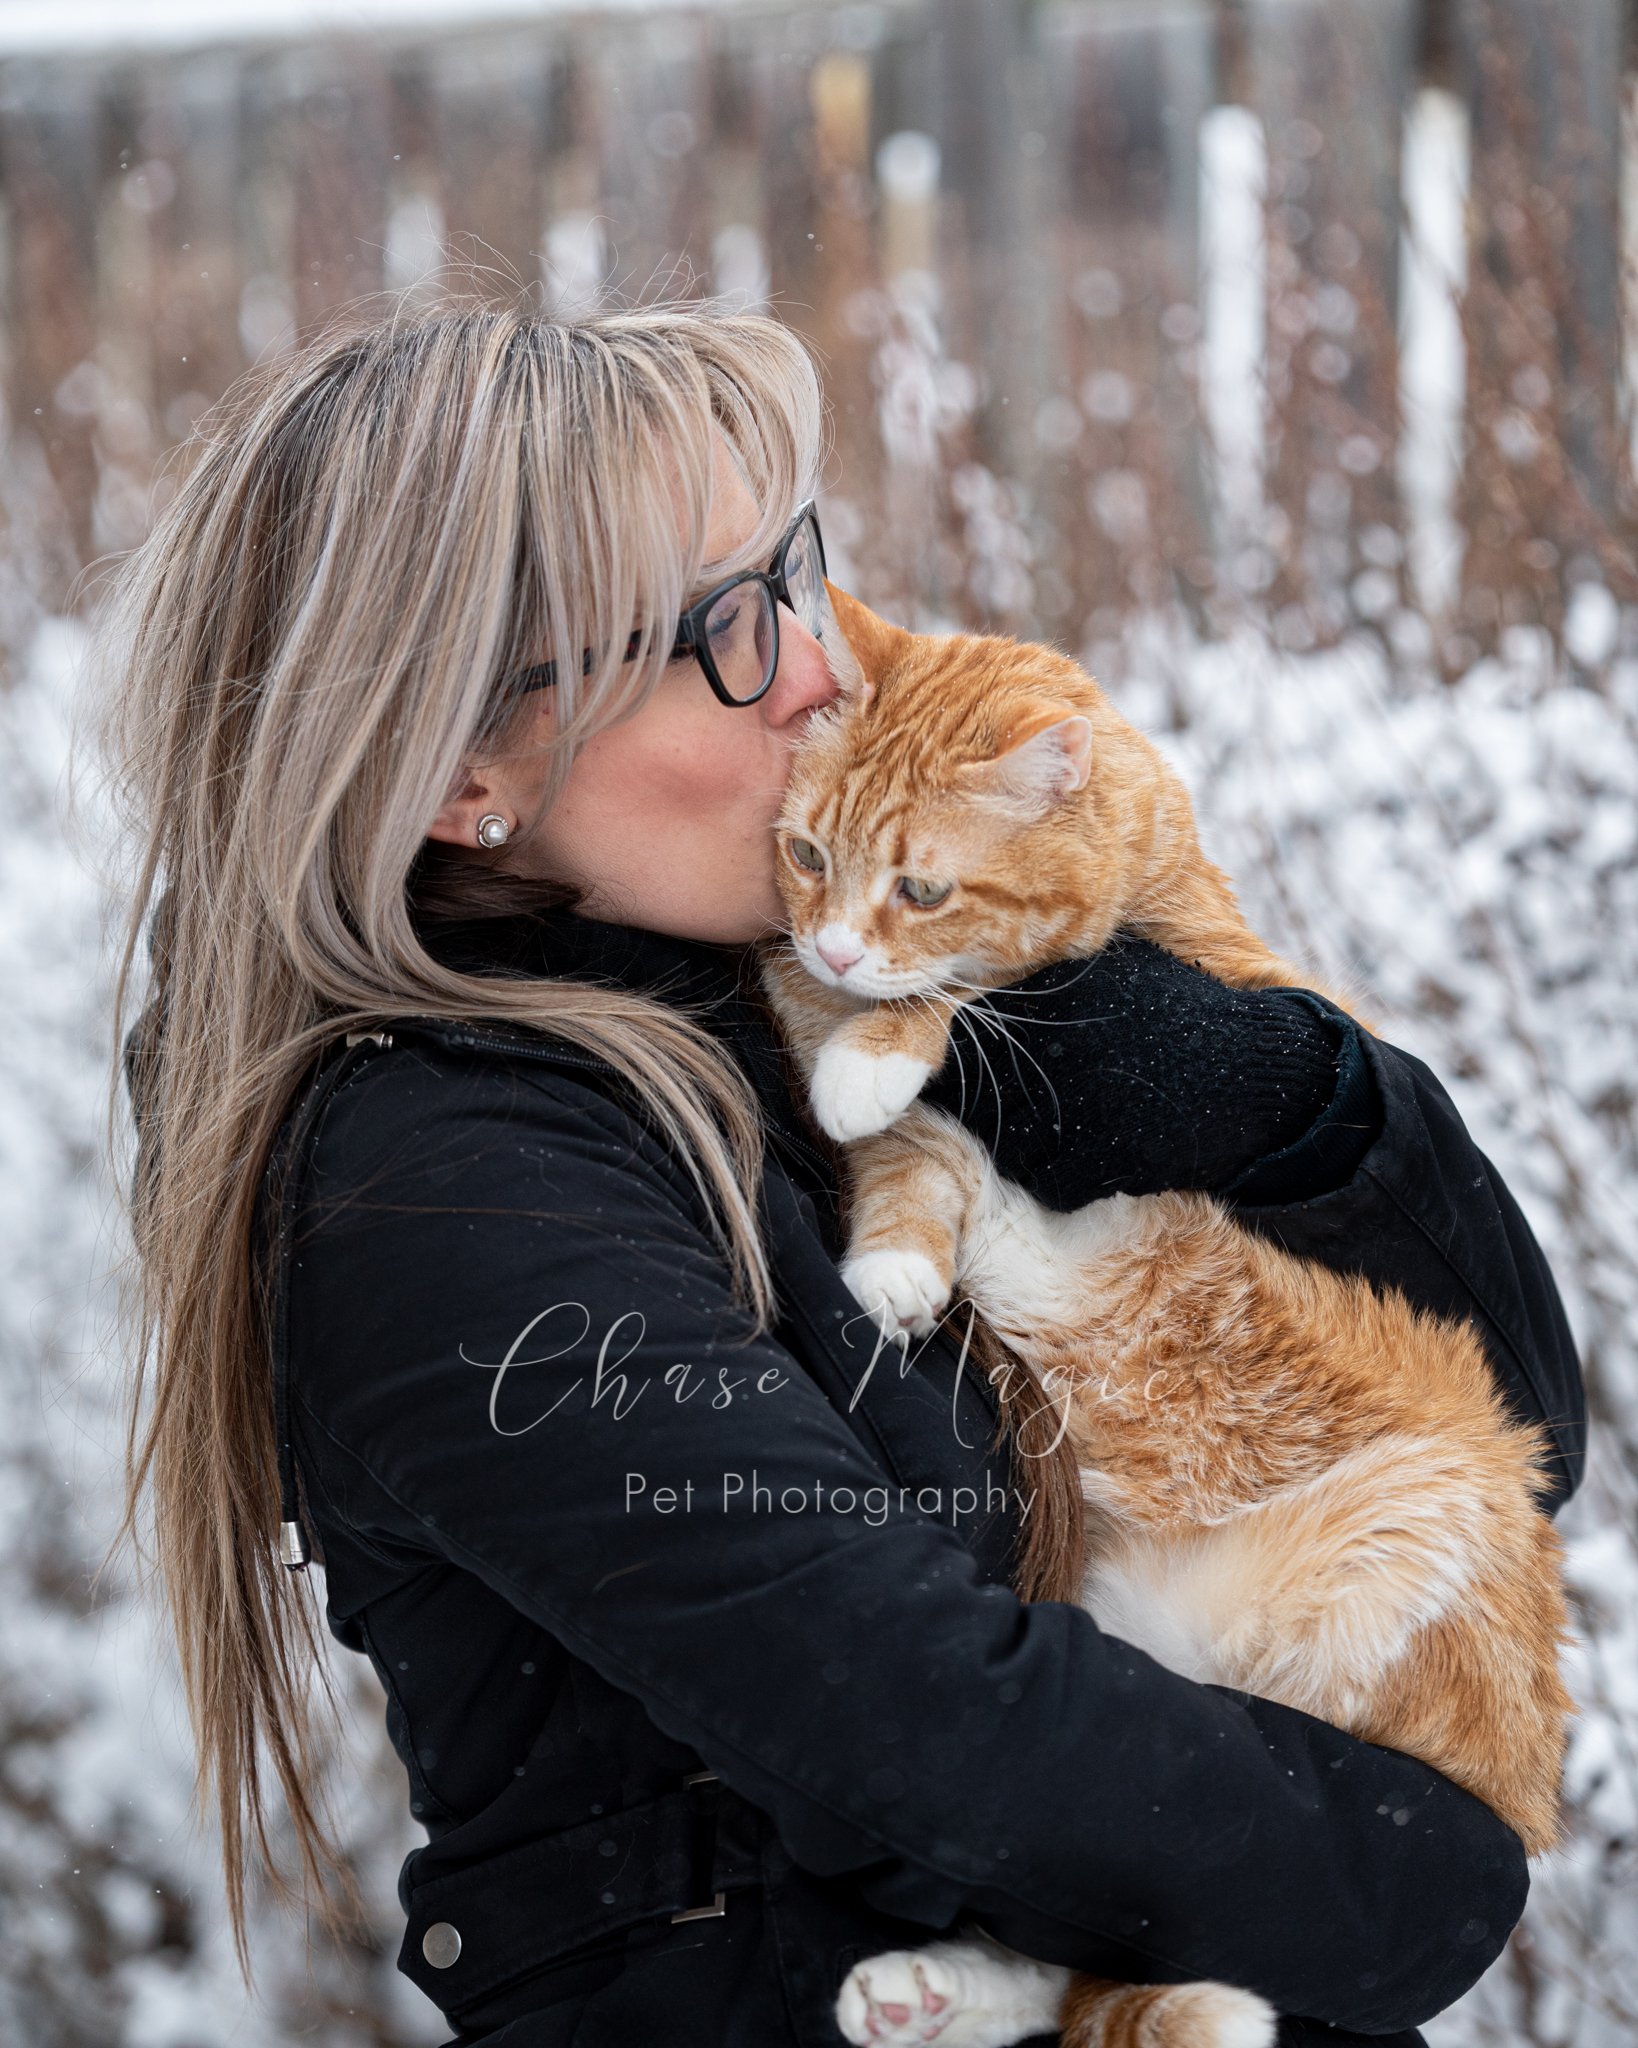 Orange cat and a women enjoying the winter snow and kisses